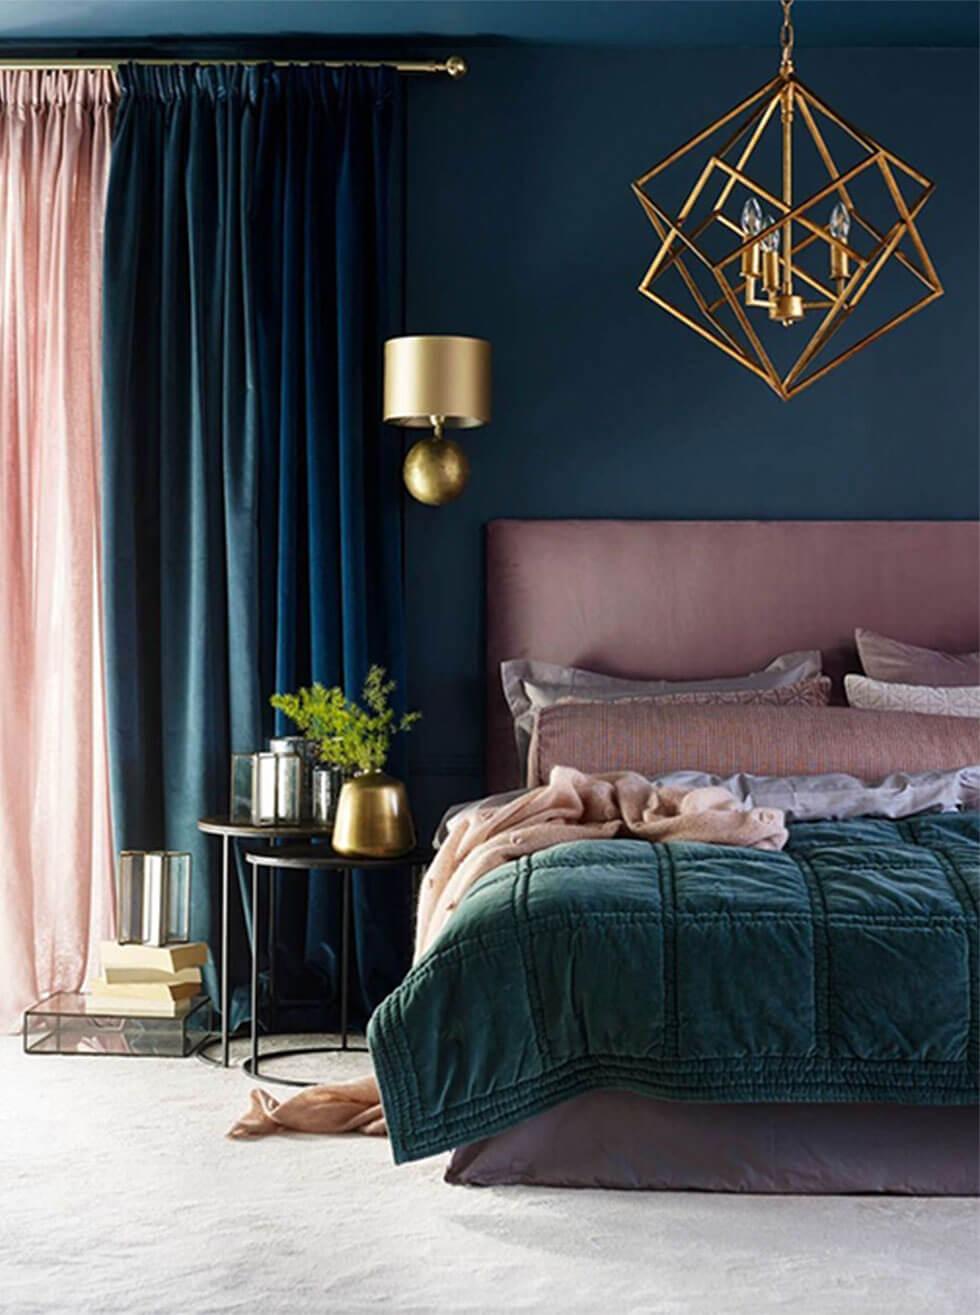 A dark teal green bedroom with dusky pink accents.